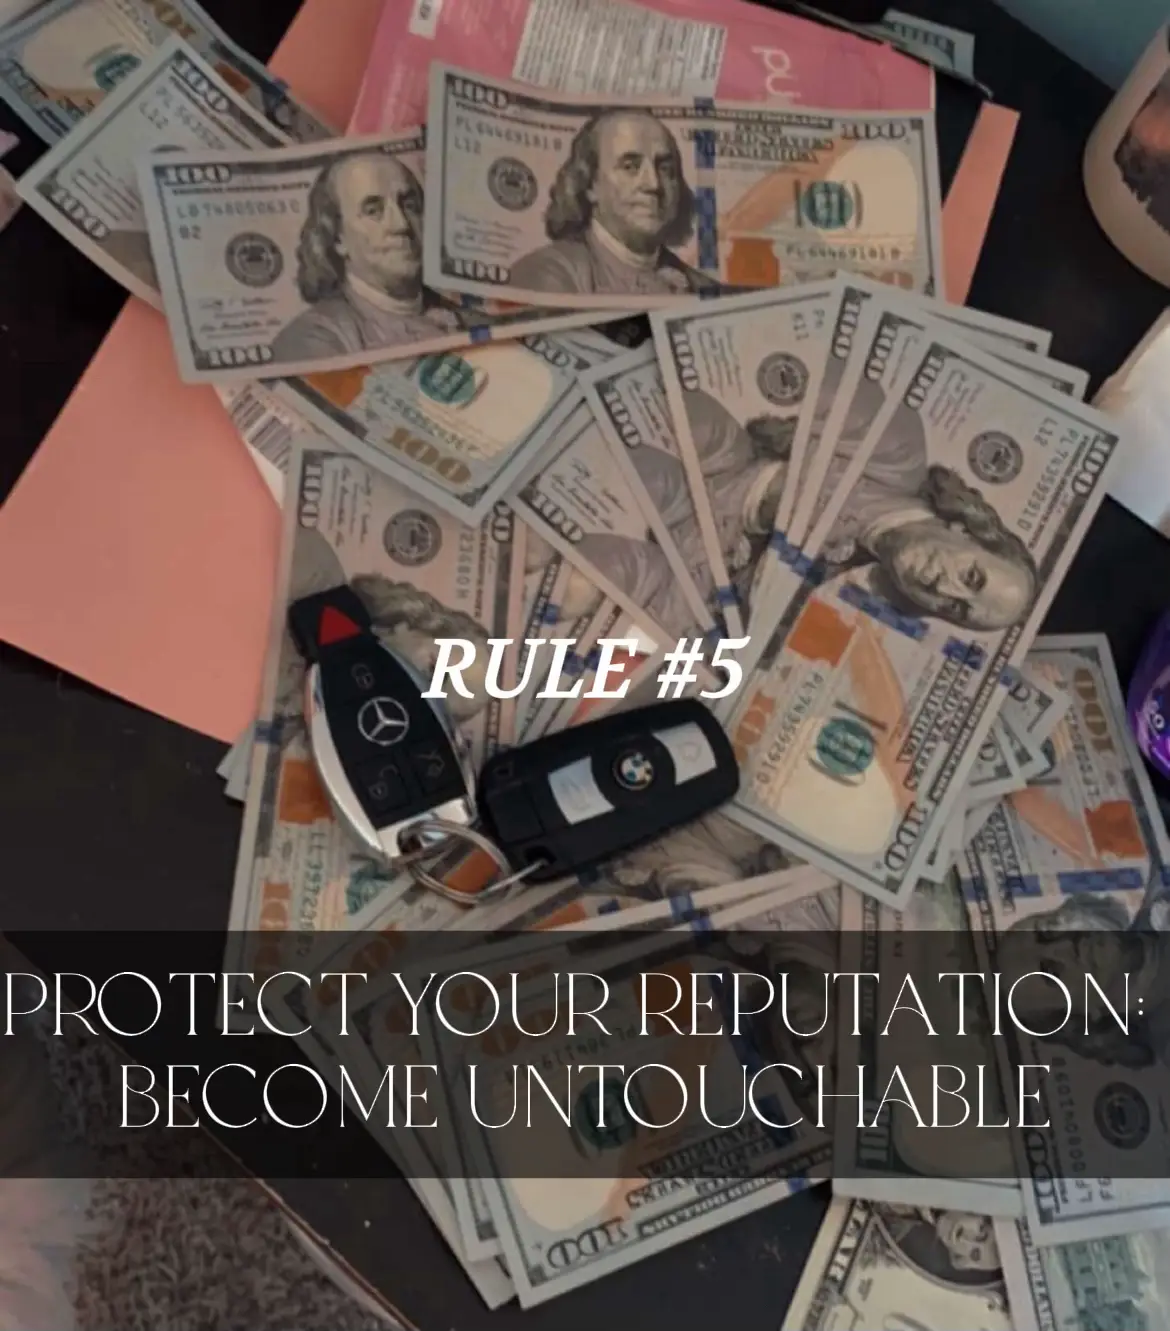  A stack of money with the words "Rule #5 Protect Your Reputation" written on top.